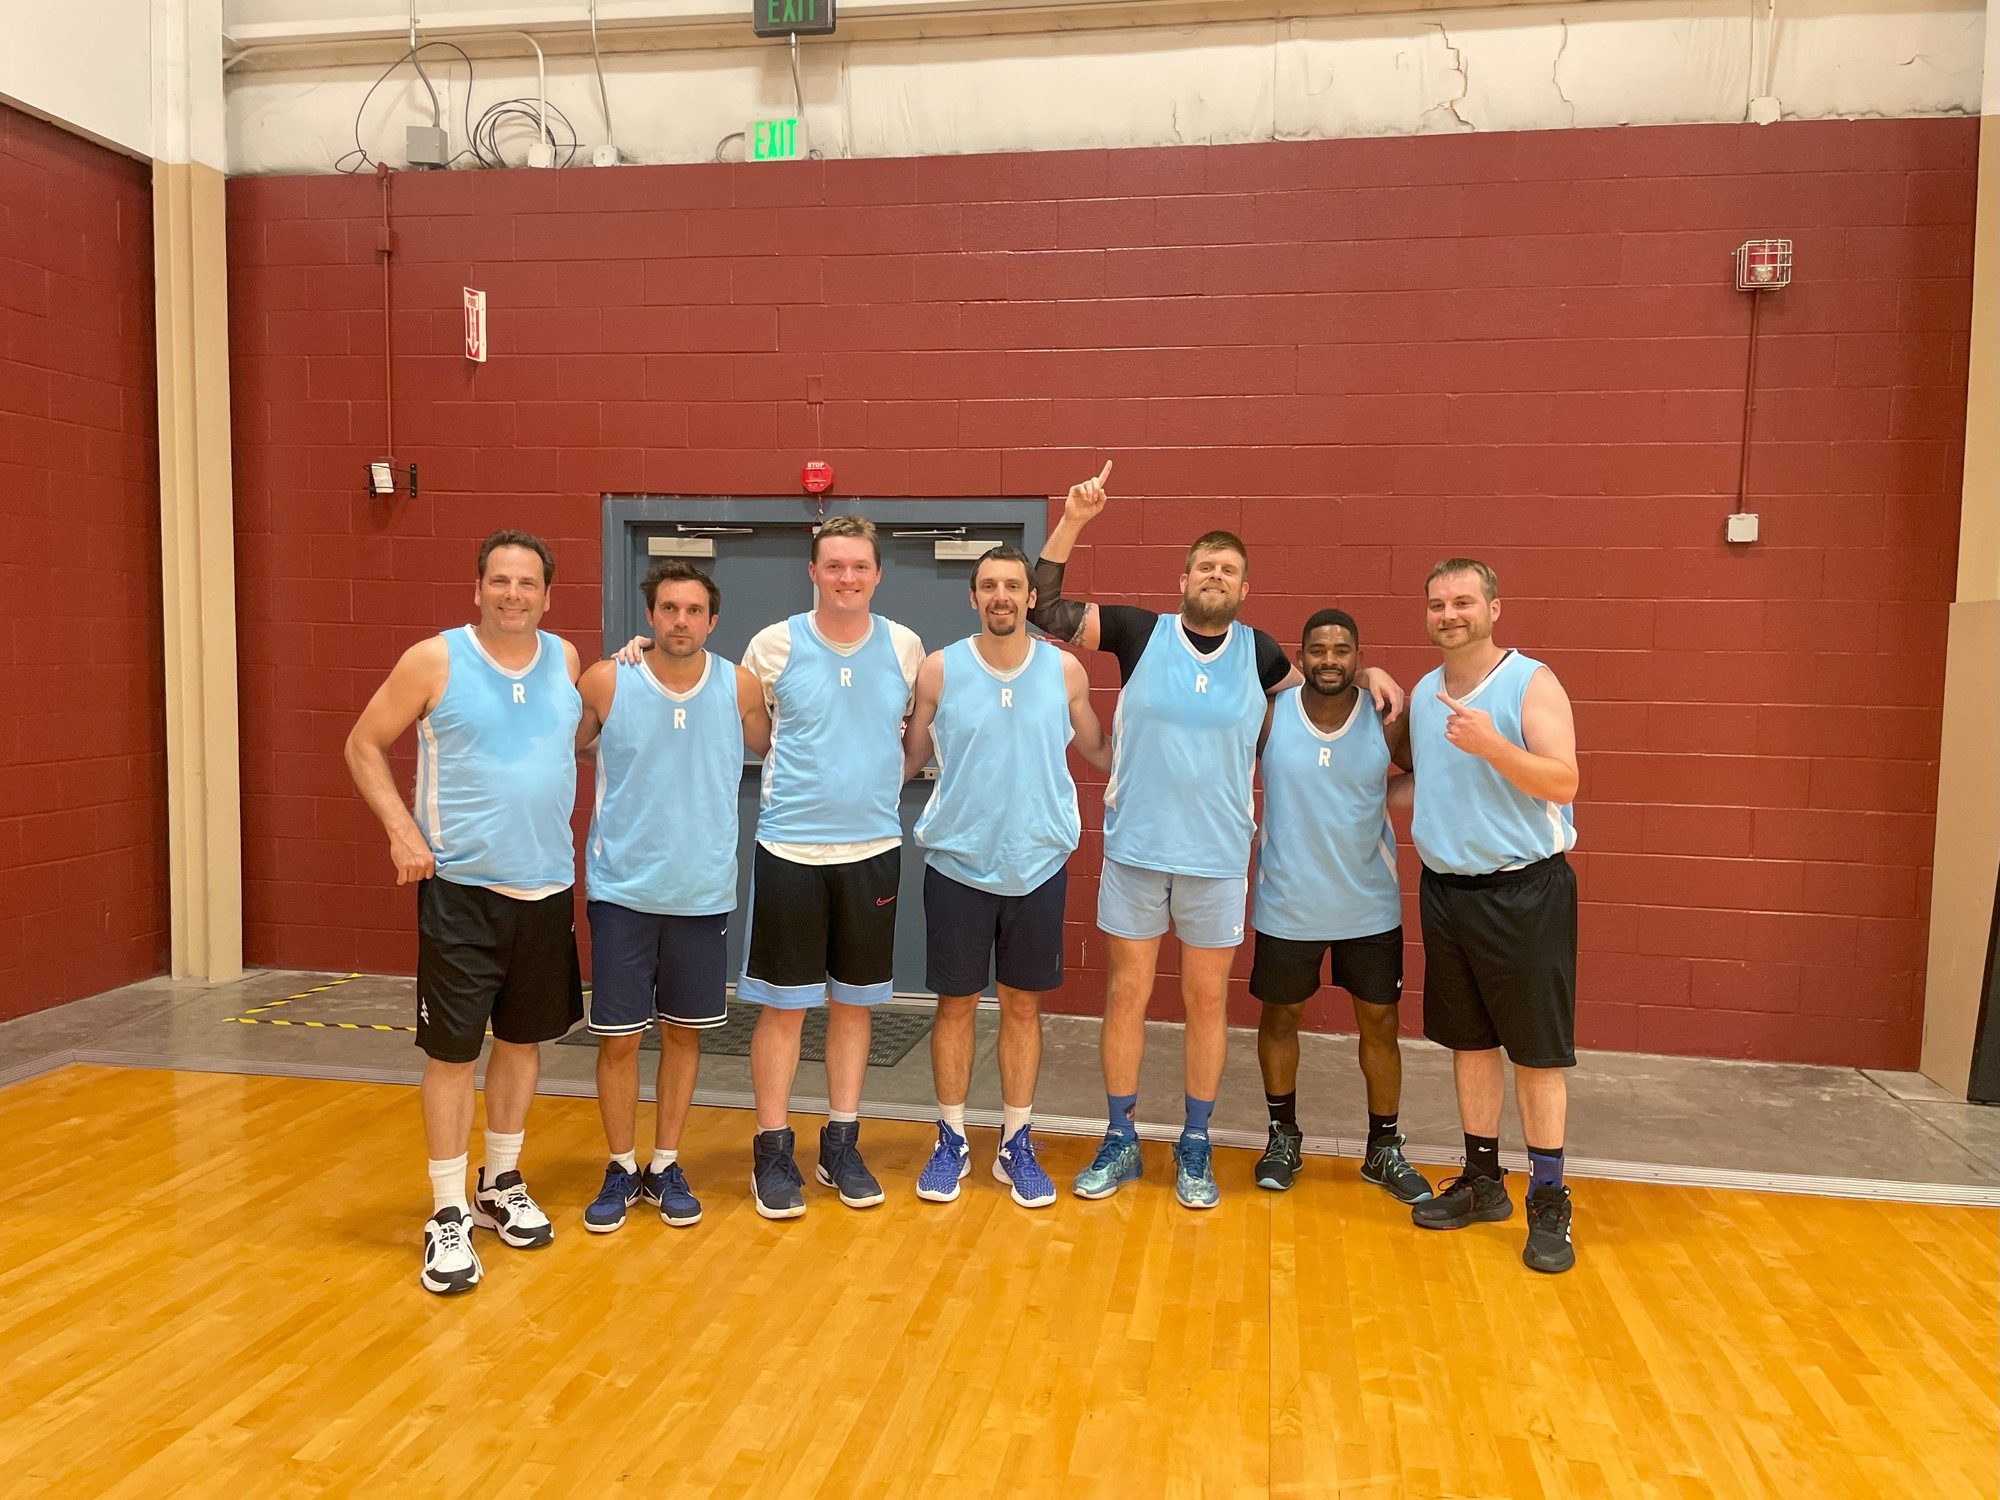 Seven men in matching blue jerseys smiling in the gym